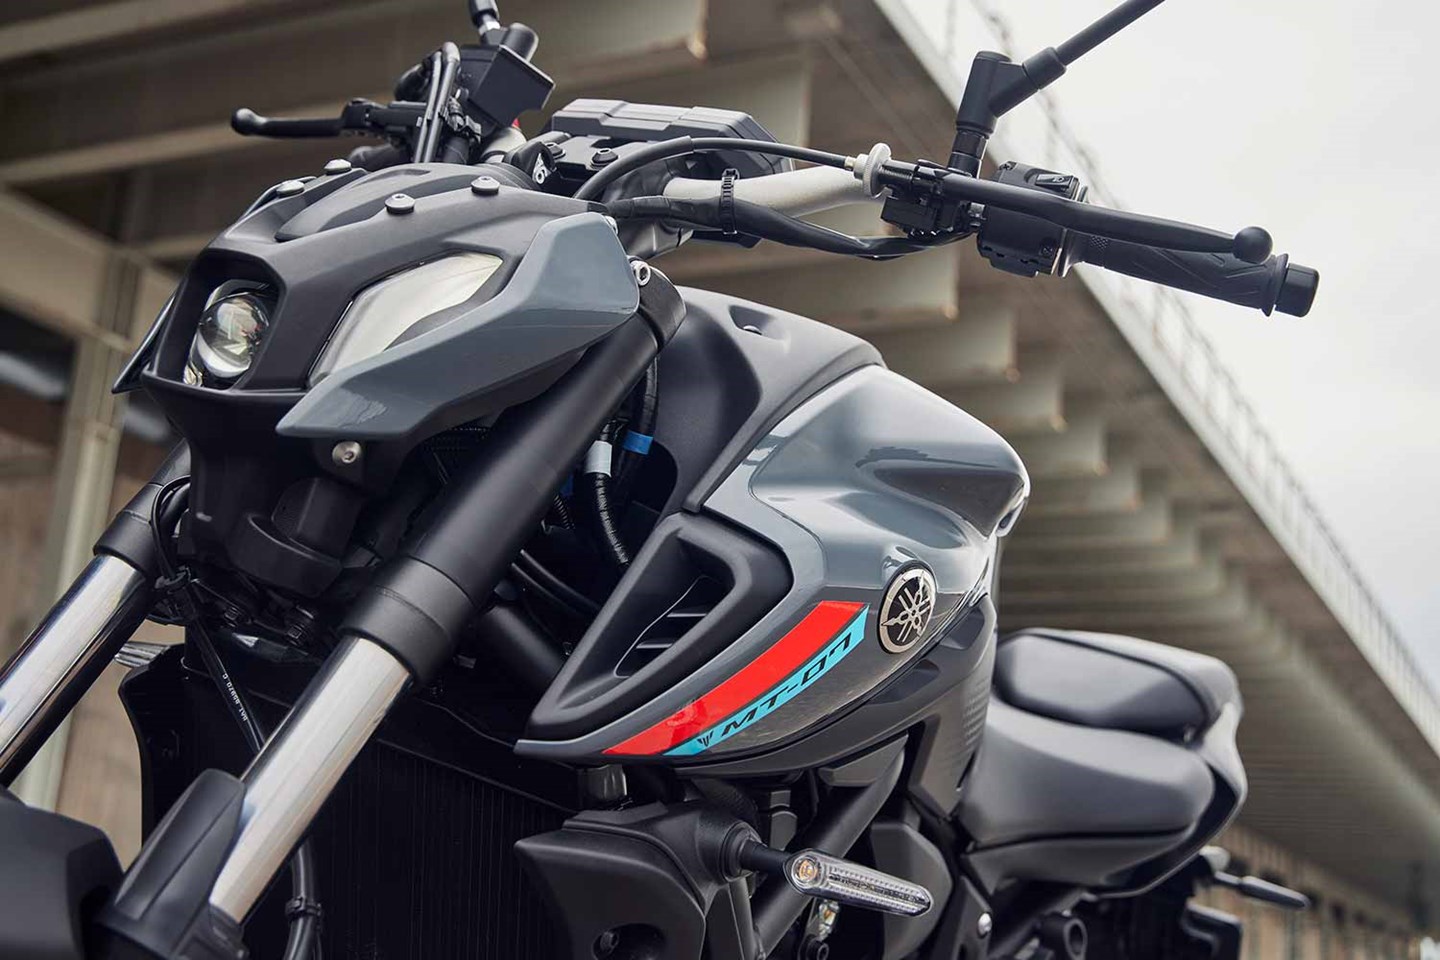 New Yamaha MT-07 Review (2021), Full Test